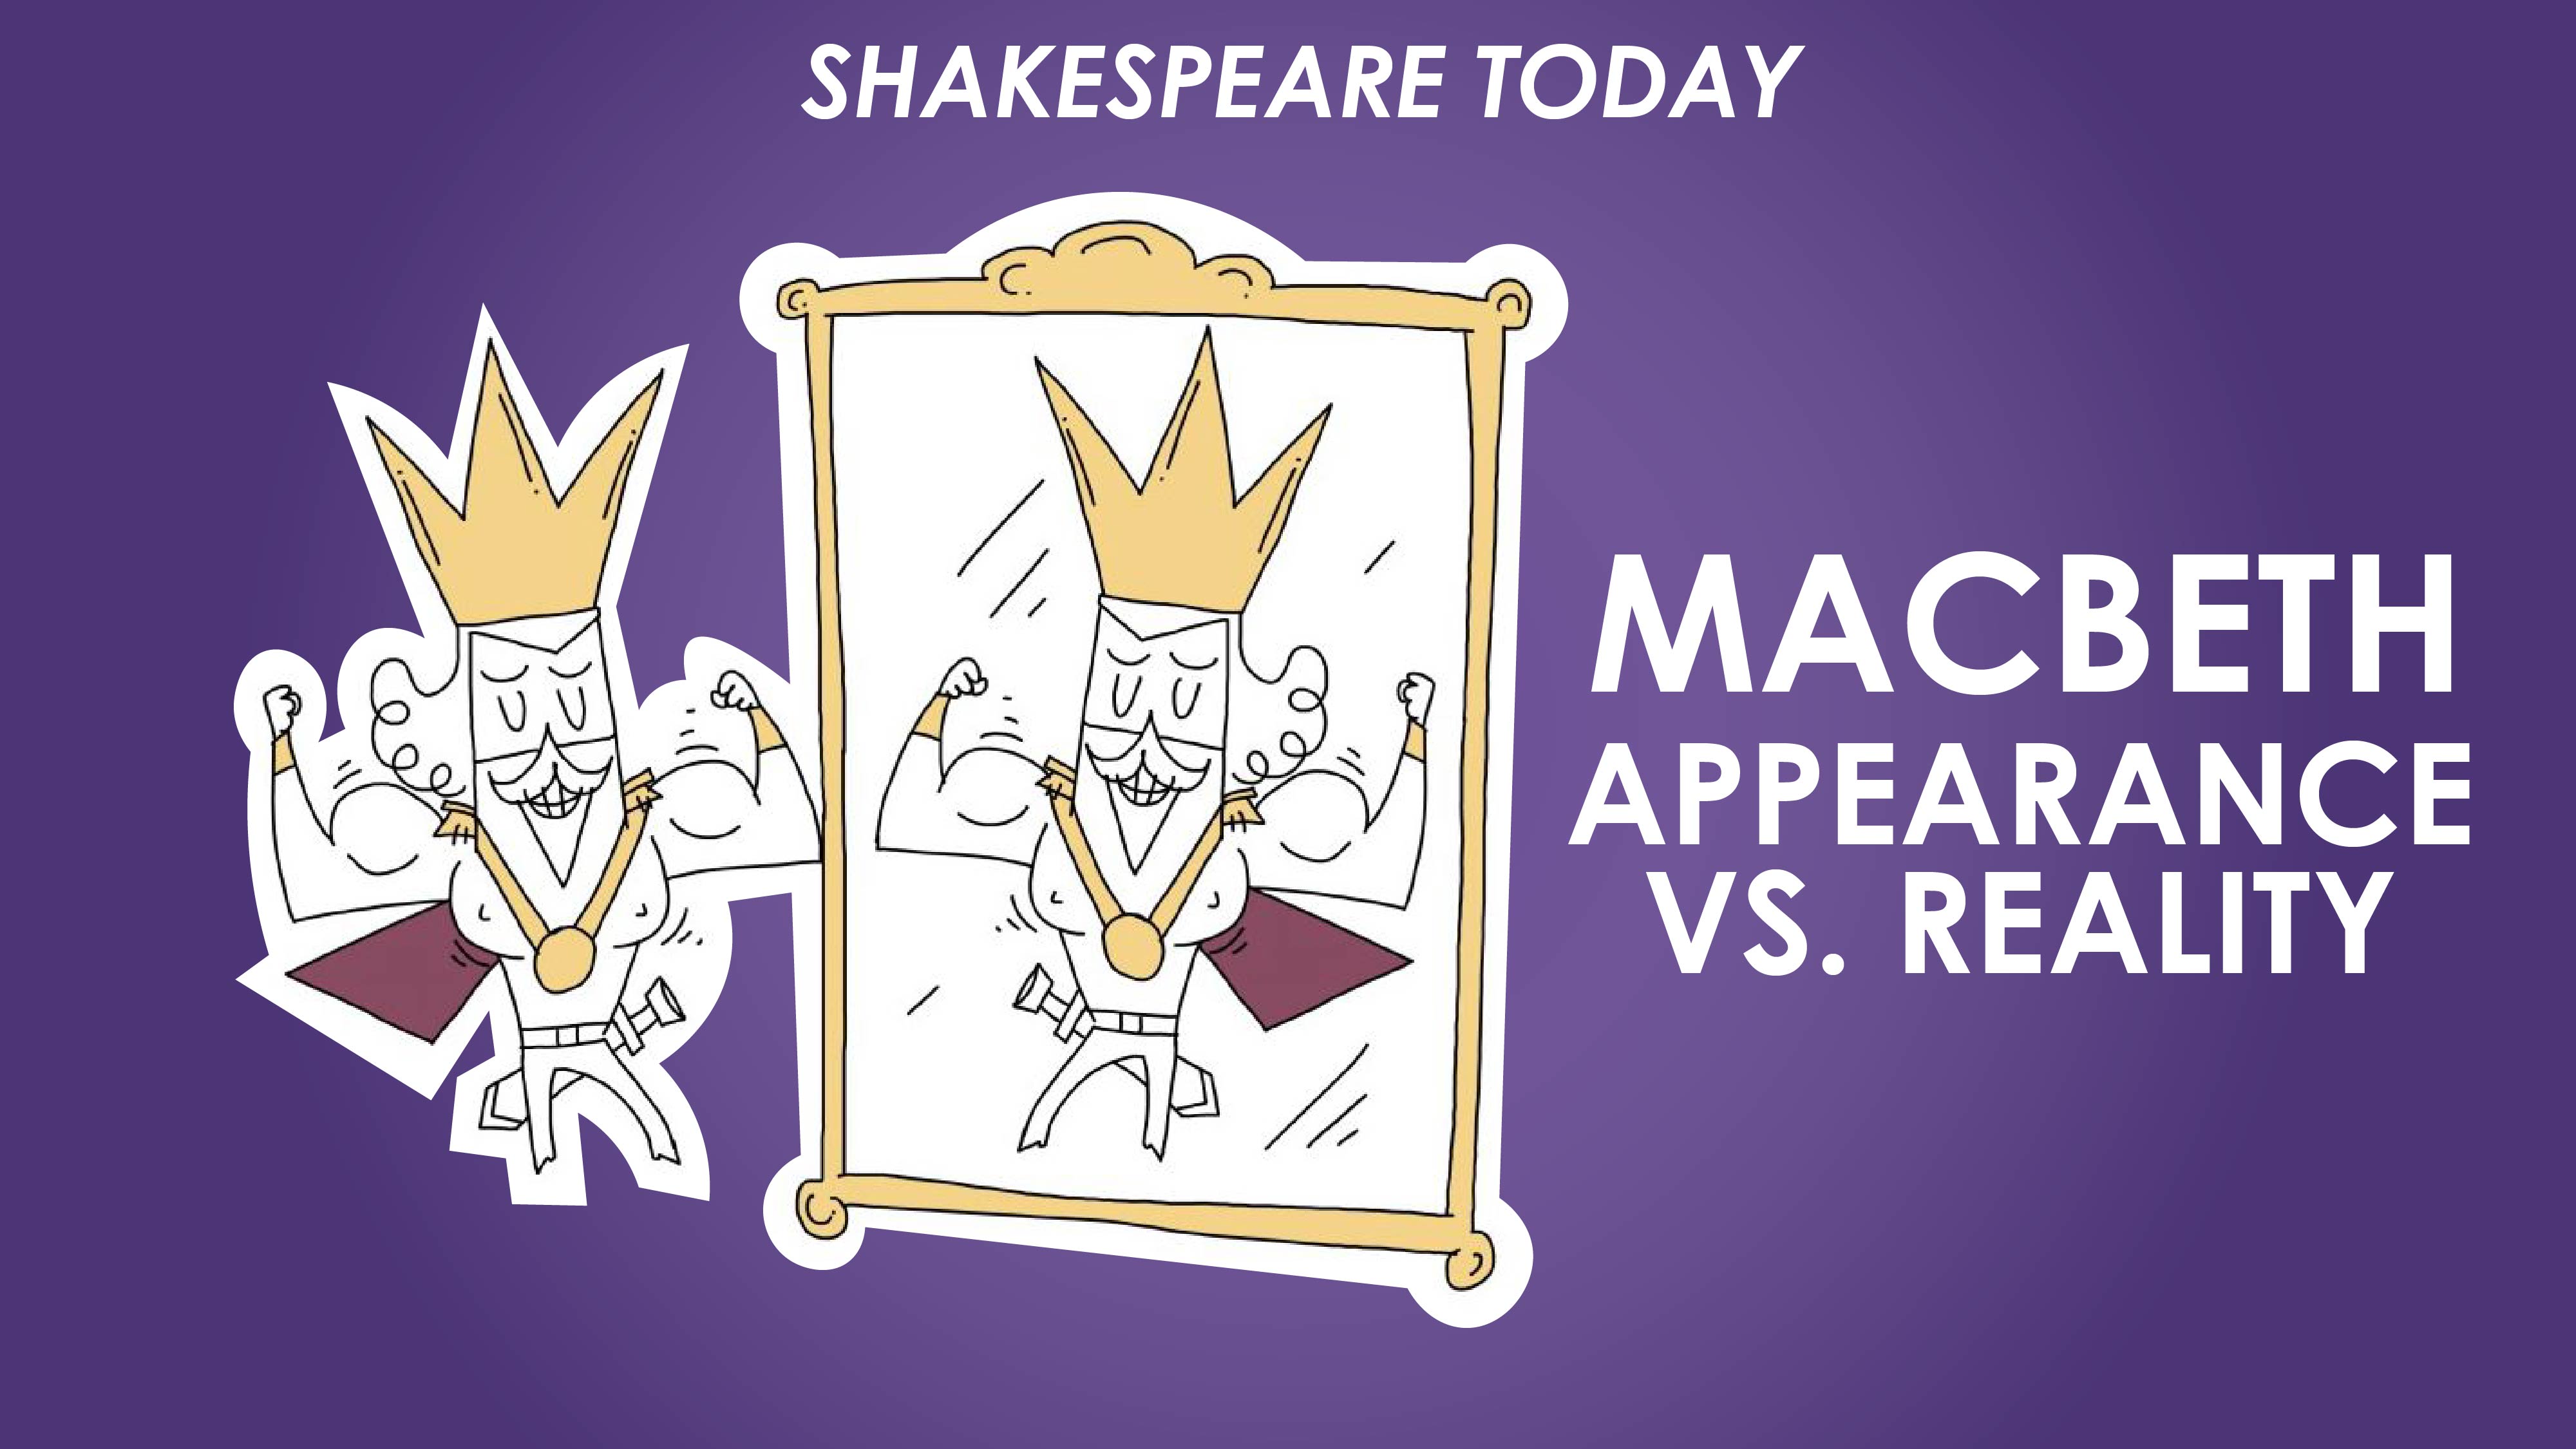 Macbeth Theme of Appearance vs Reality - Shakespeare Today Series